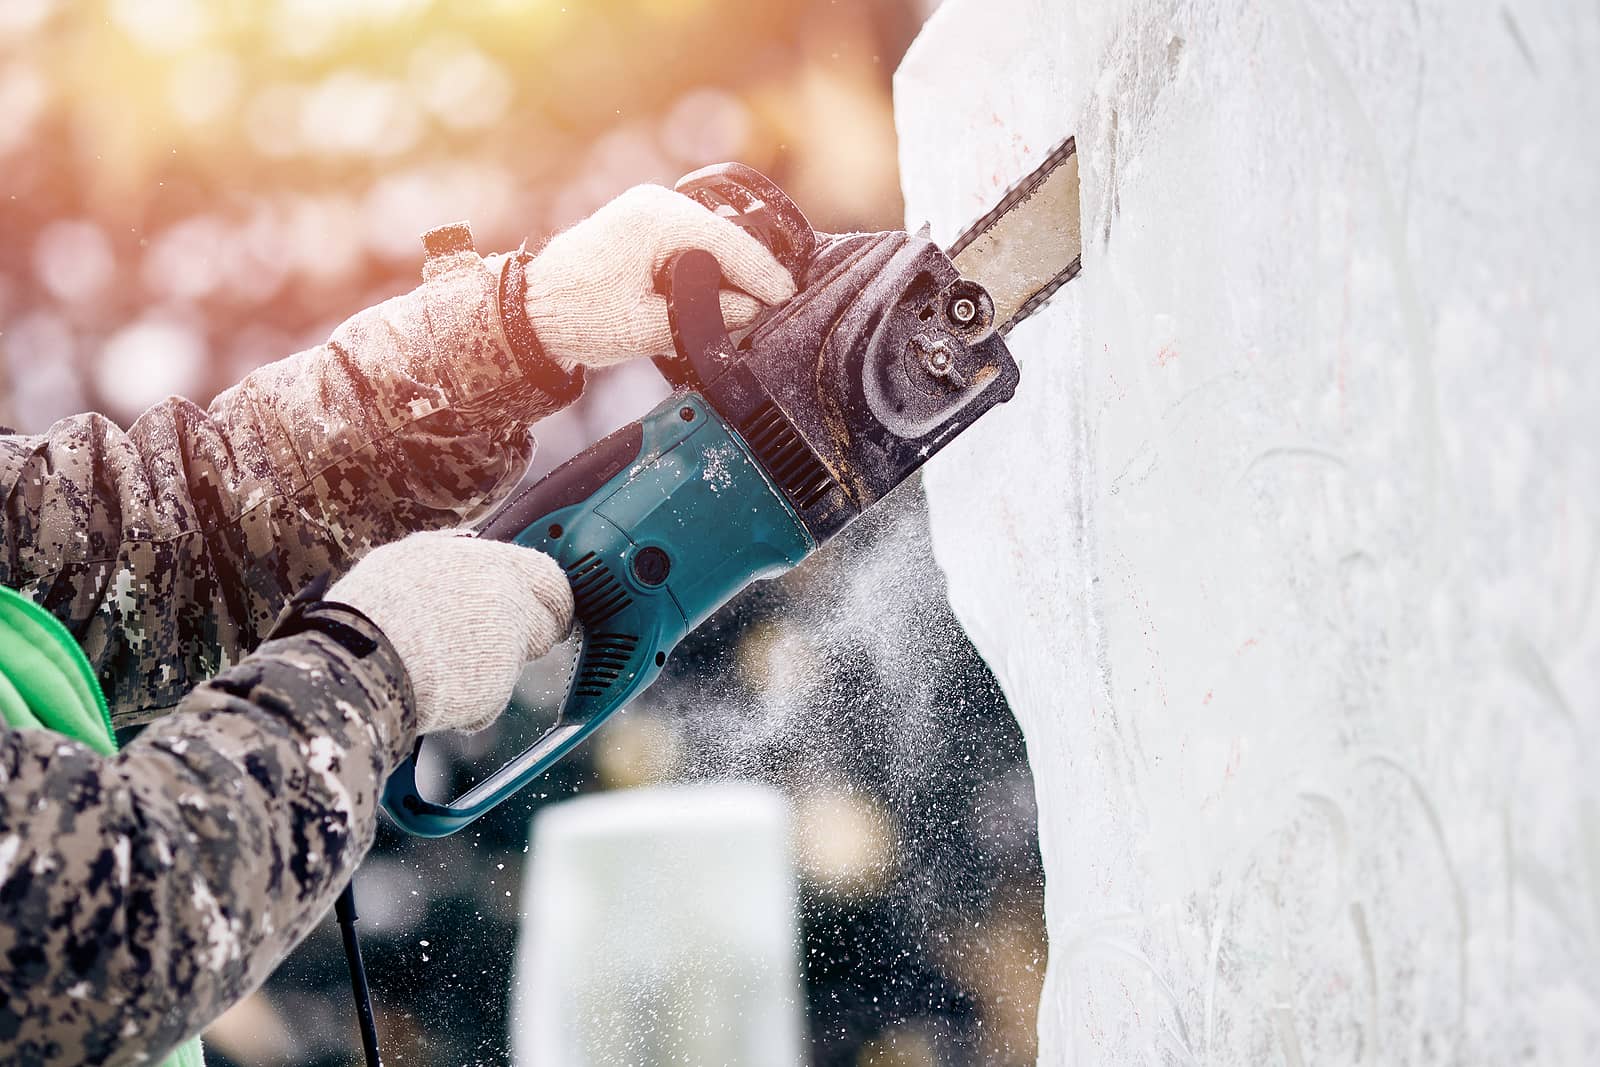 ice-sculpture-carving-man-use-chainsaw-cut-frozen-winter